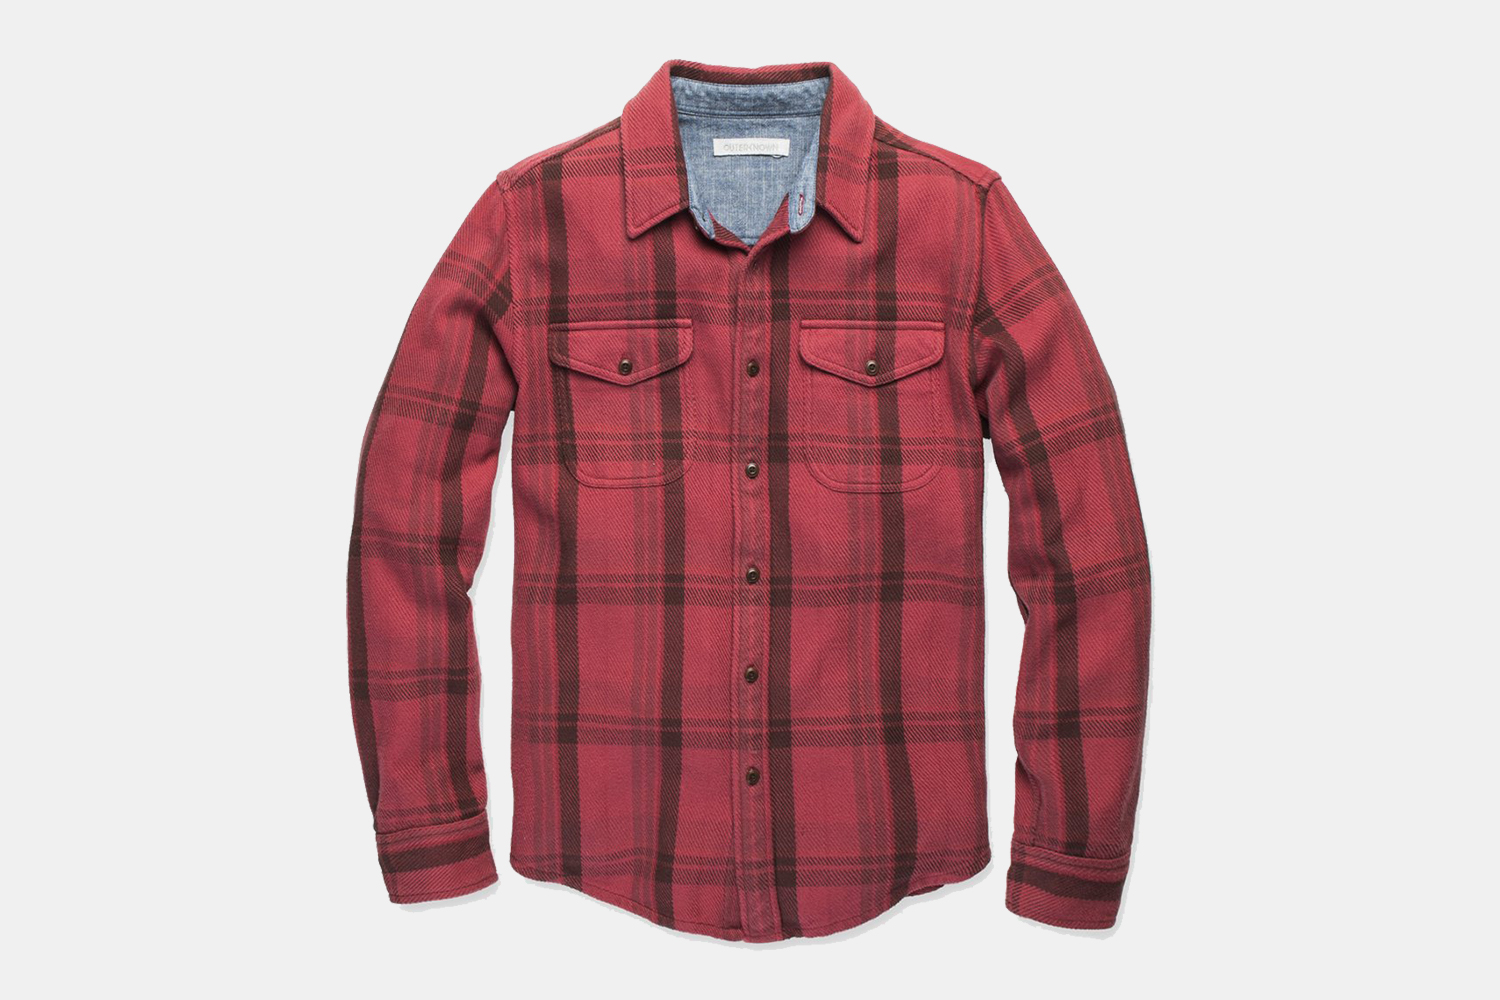 Outerknown Blanket Shirt discount